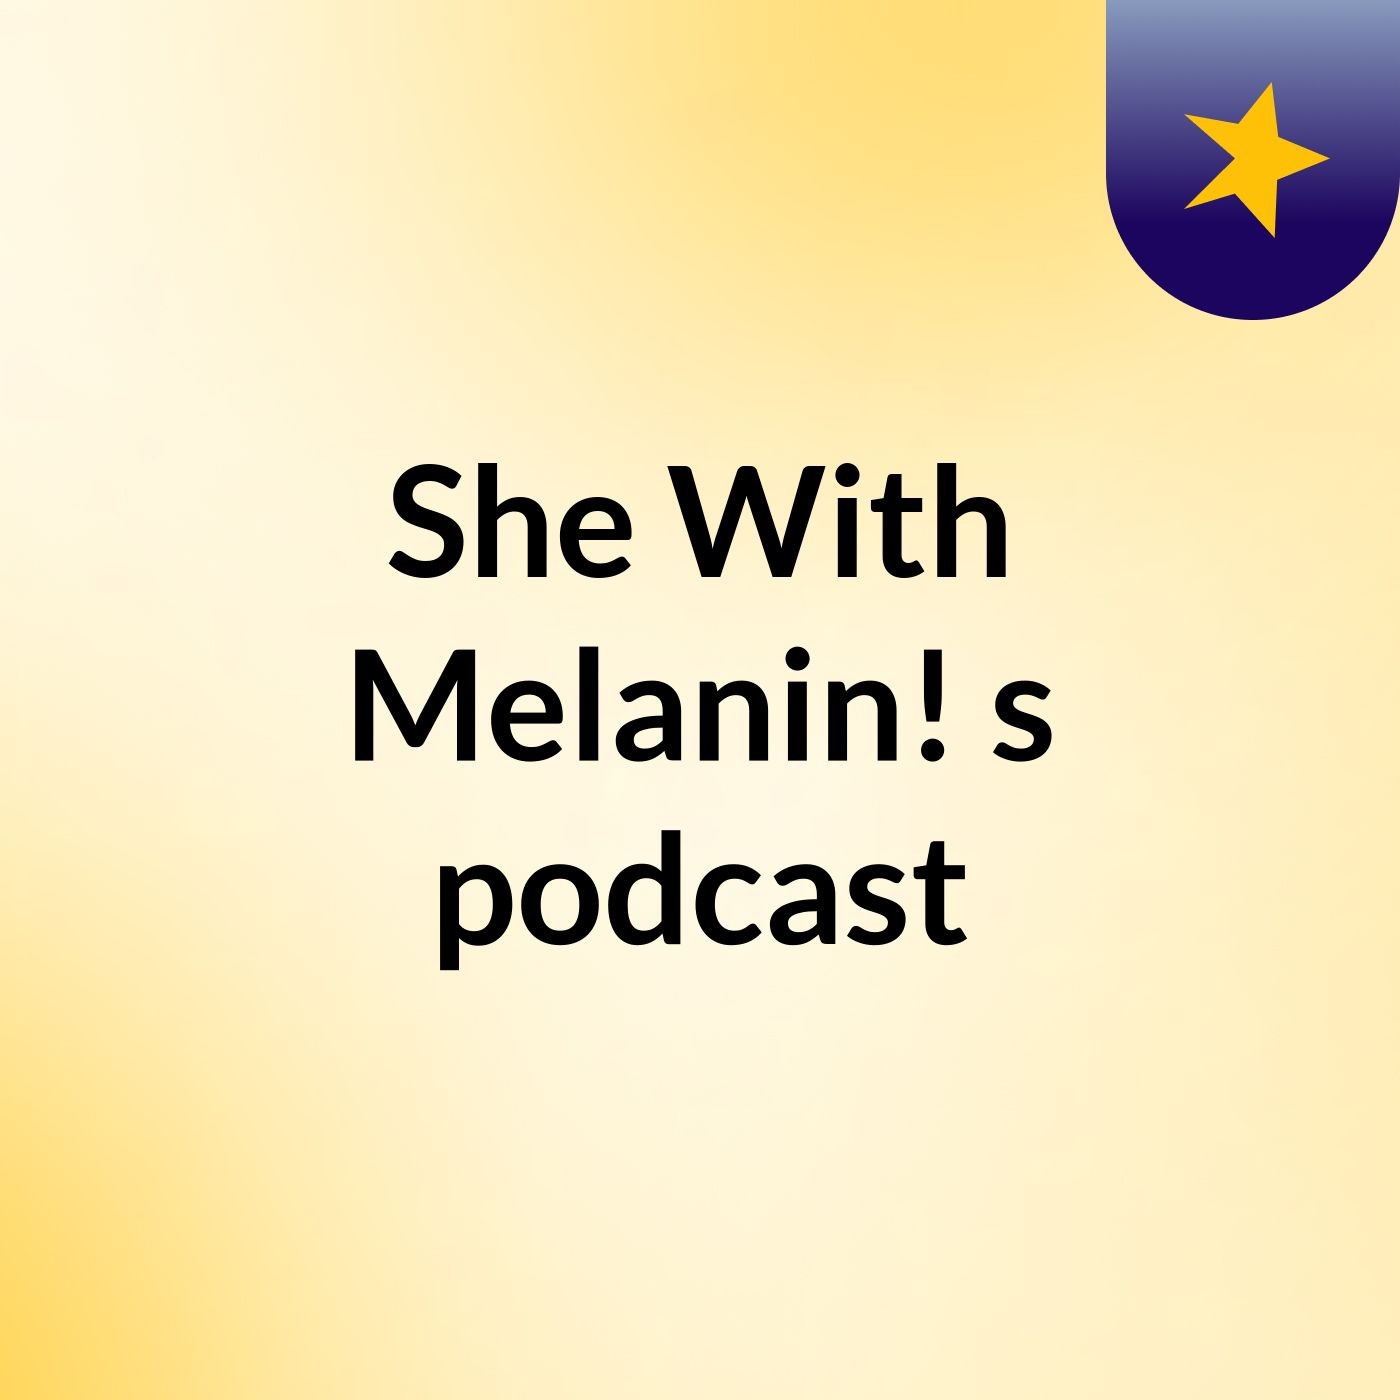 Episode 5 - She With Melanin!'s podcast